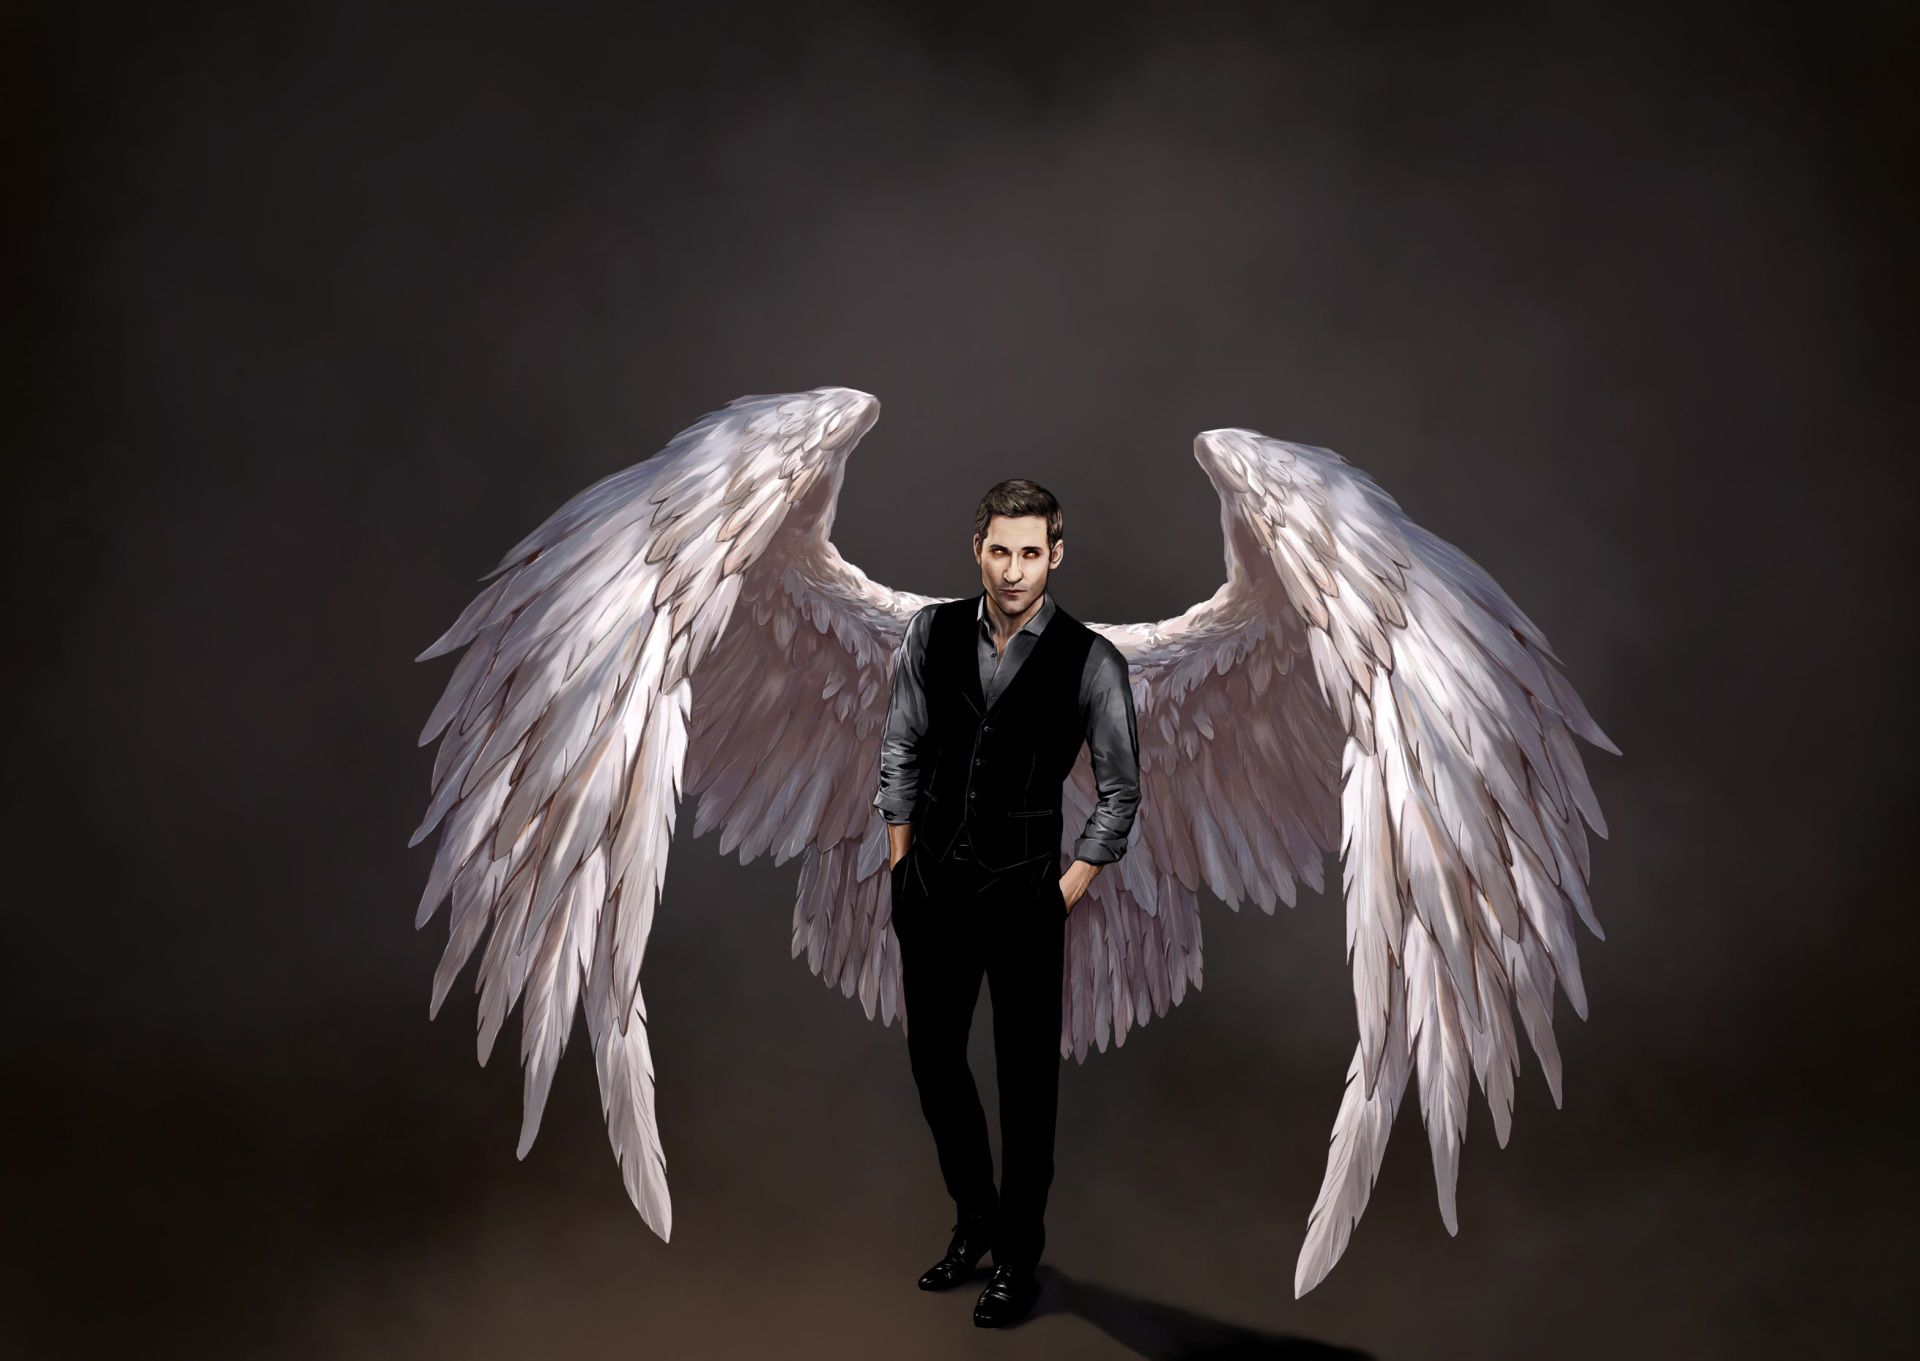 lucifer wallpaper download free for pc HD. Lucifer